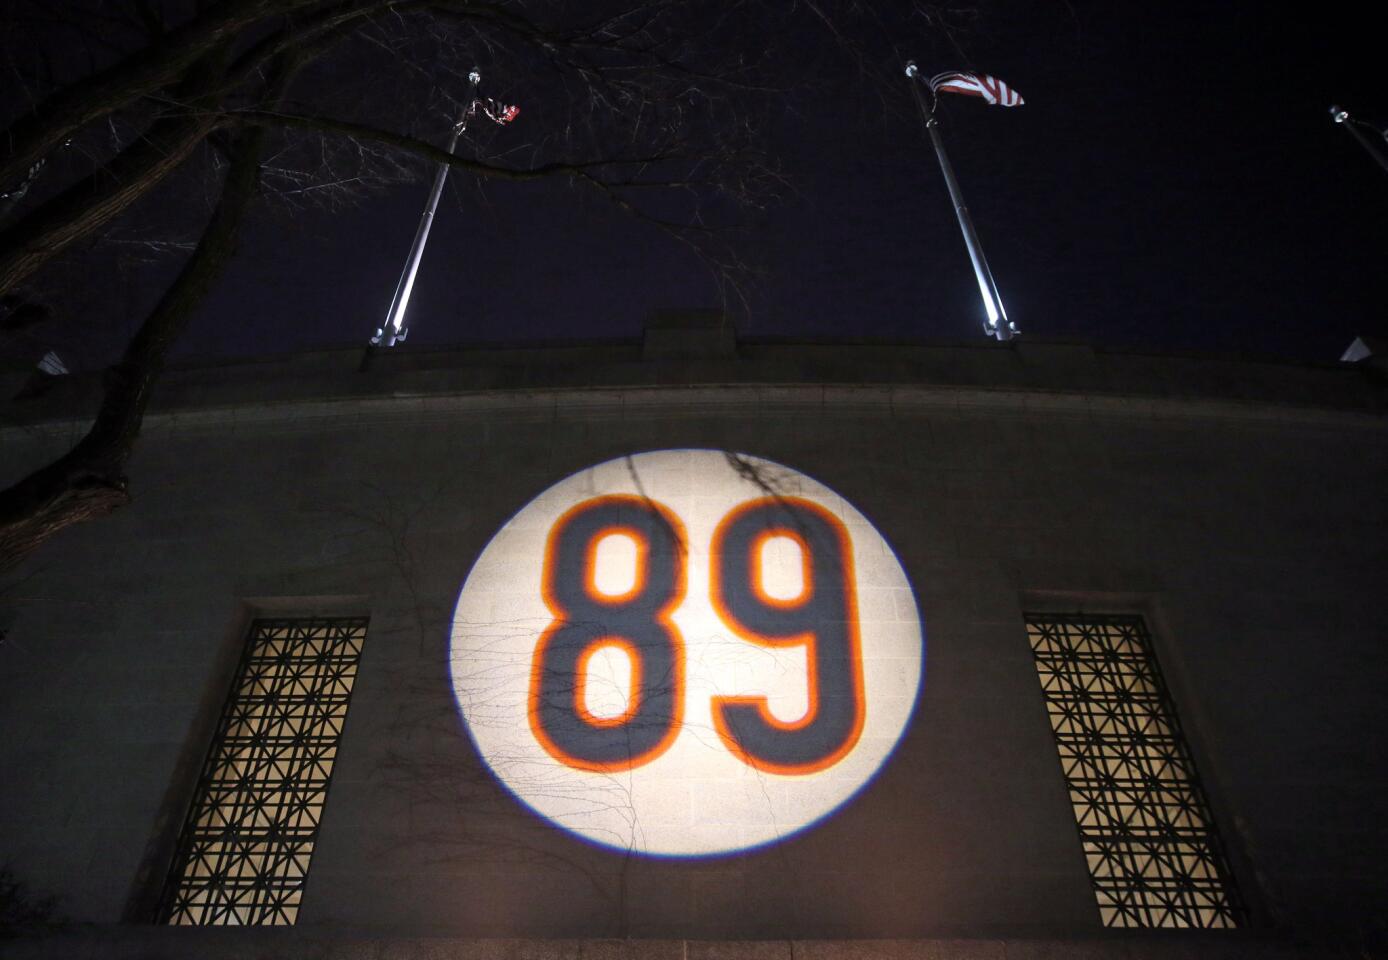 Mike Ditka's number